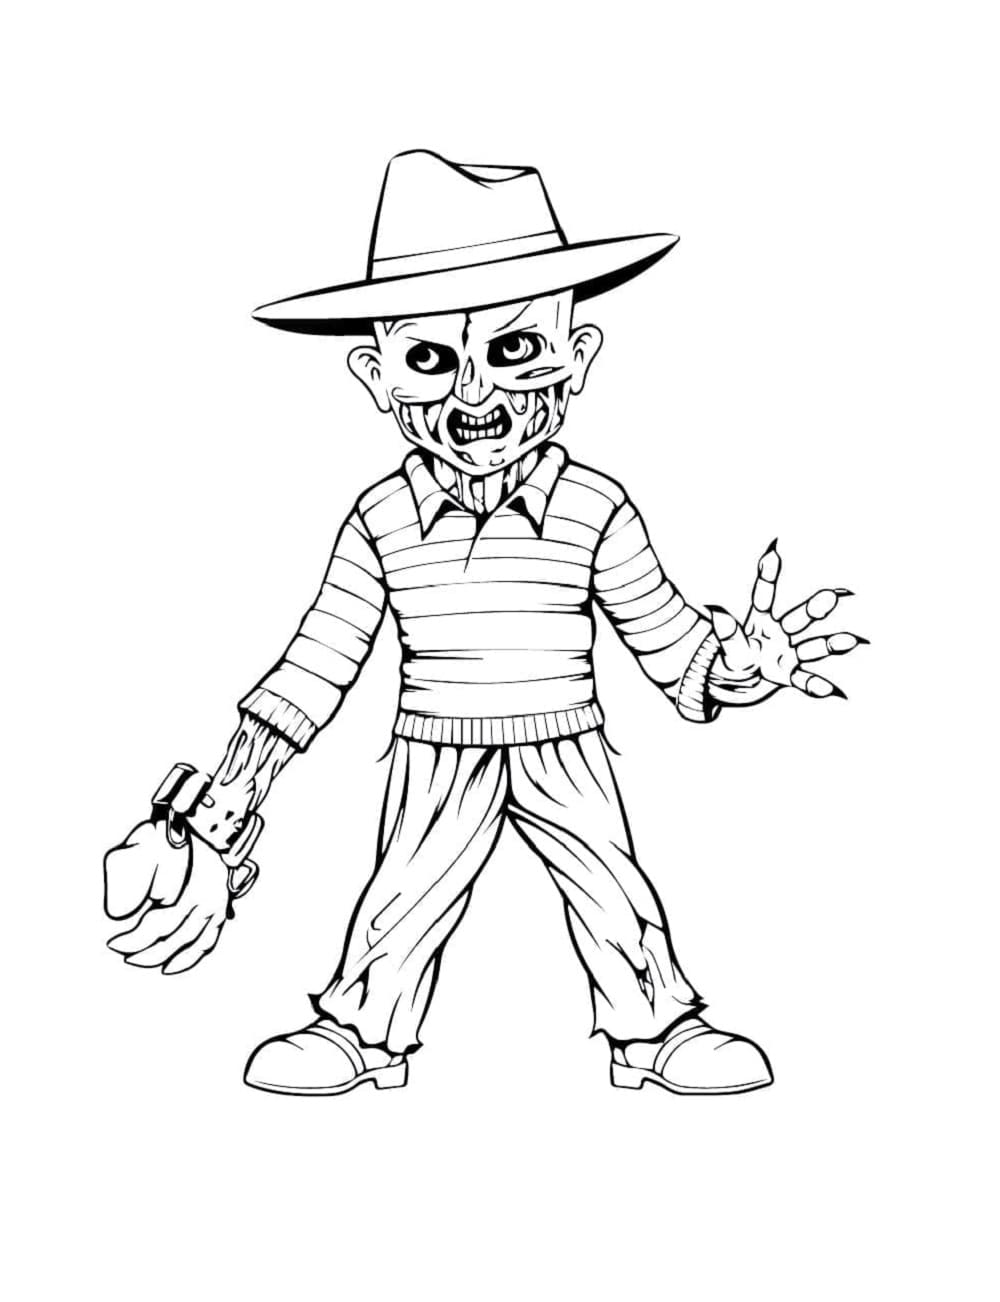 Printable Little Freddy Krueger Coloring Page